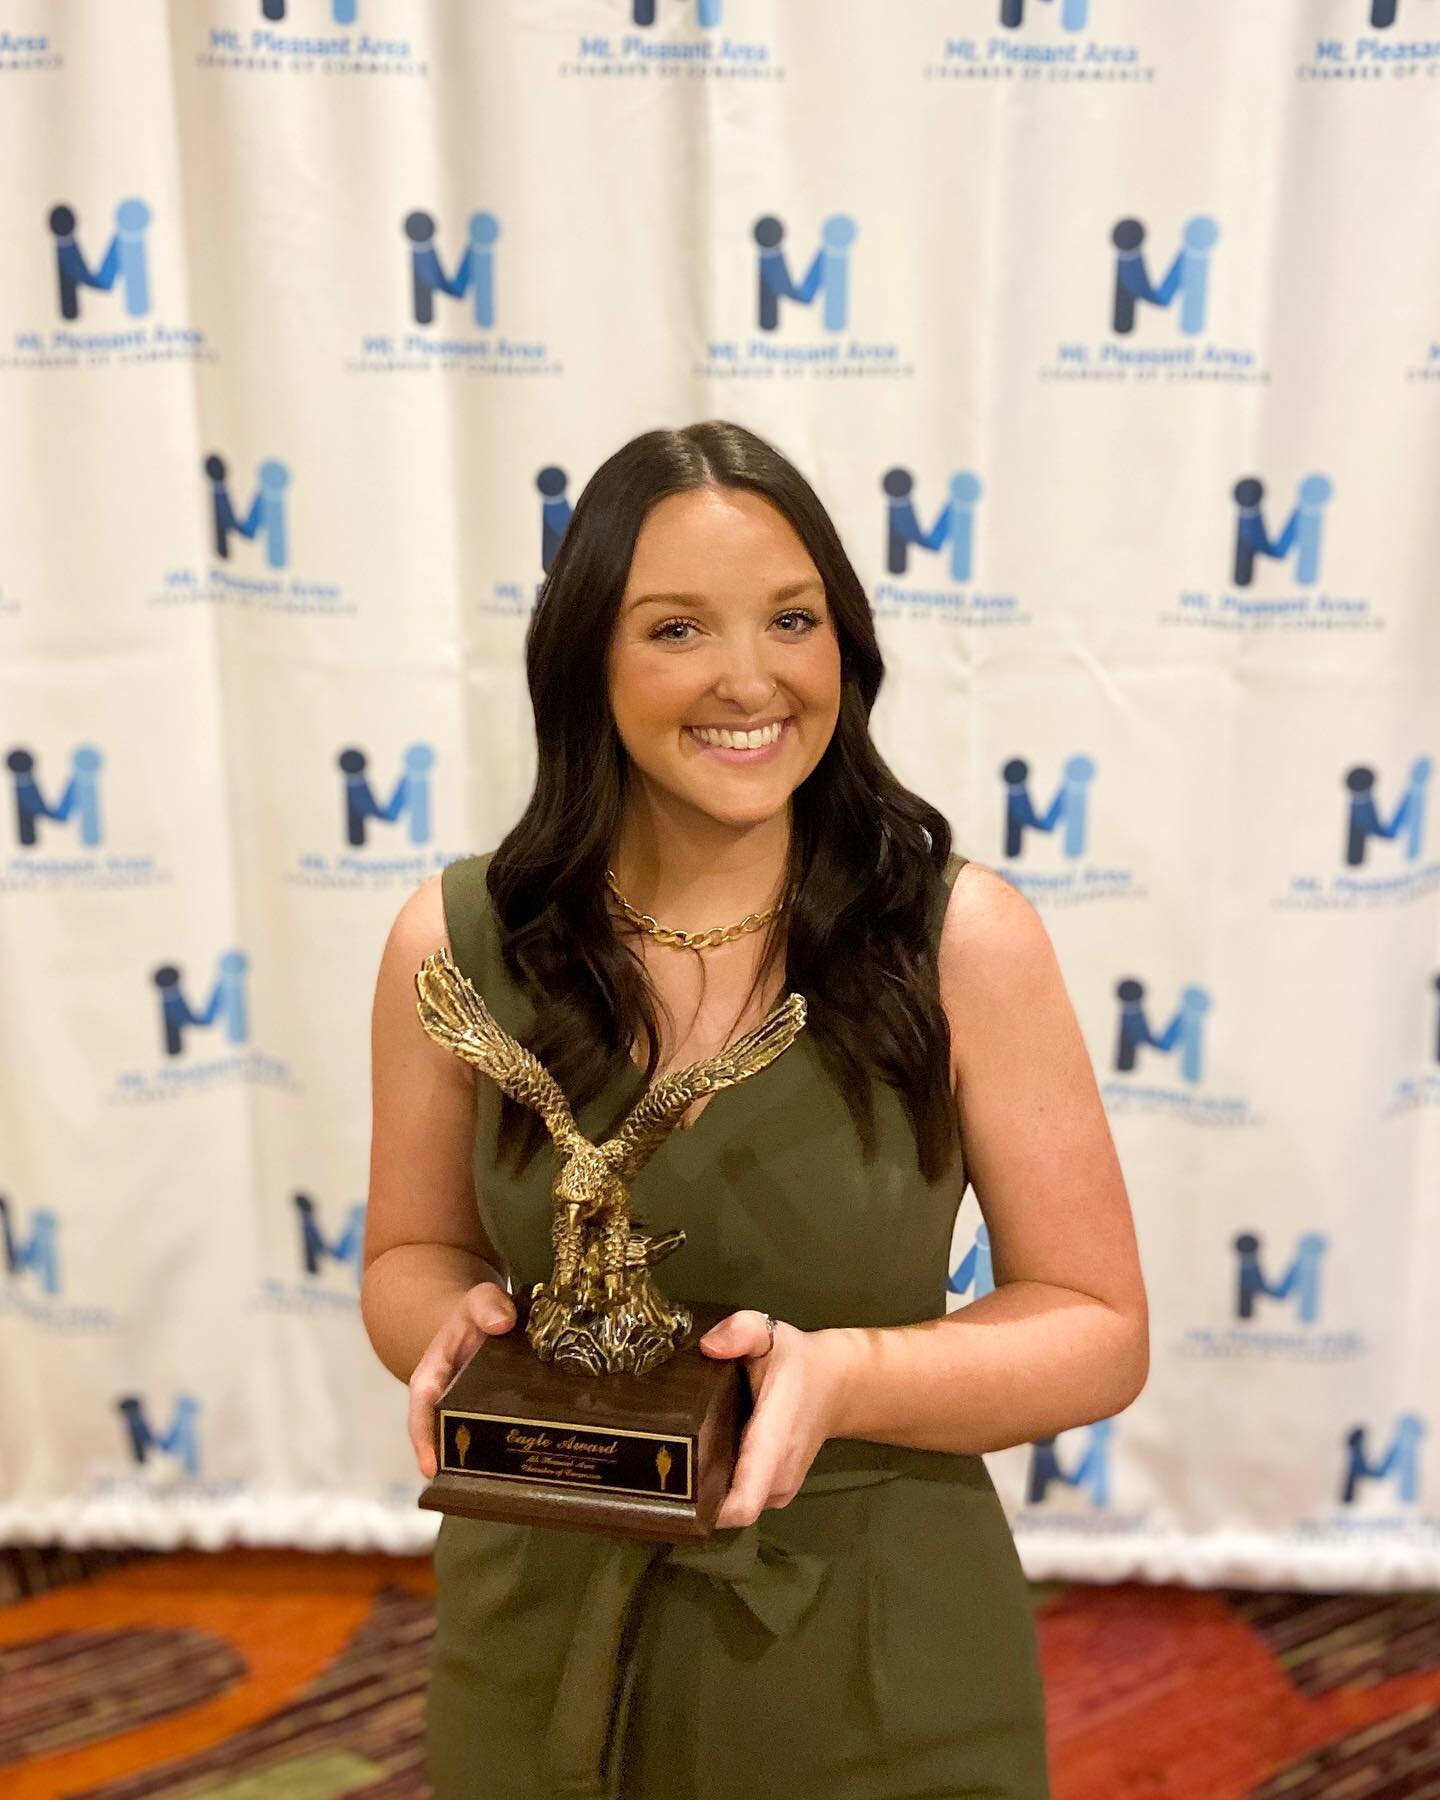 The Mt. Pleasant Jaycees are thrilled to recognize Lindsey Miller as our 2021 Eagle Award winner! 

Lindsey is the Community VP for the Mt. Pleasant Jaycees and an active member of the Mount Pleasant Craft Beer Festival Committee. She manages social 